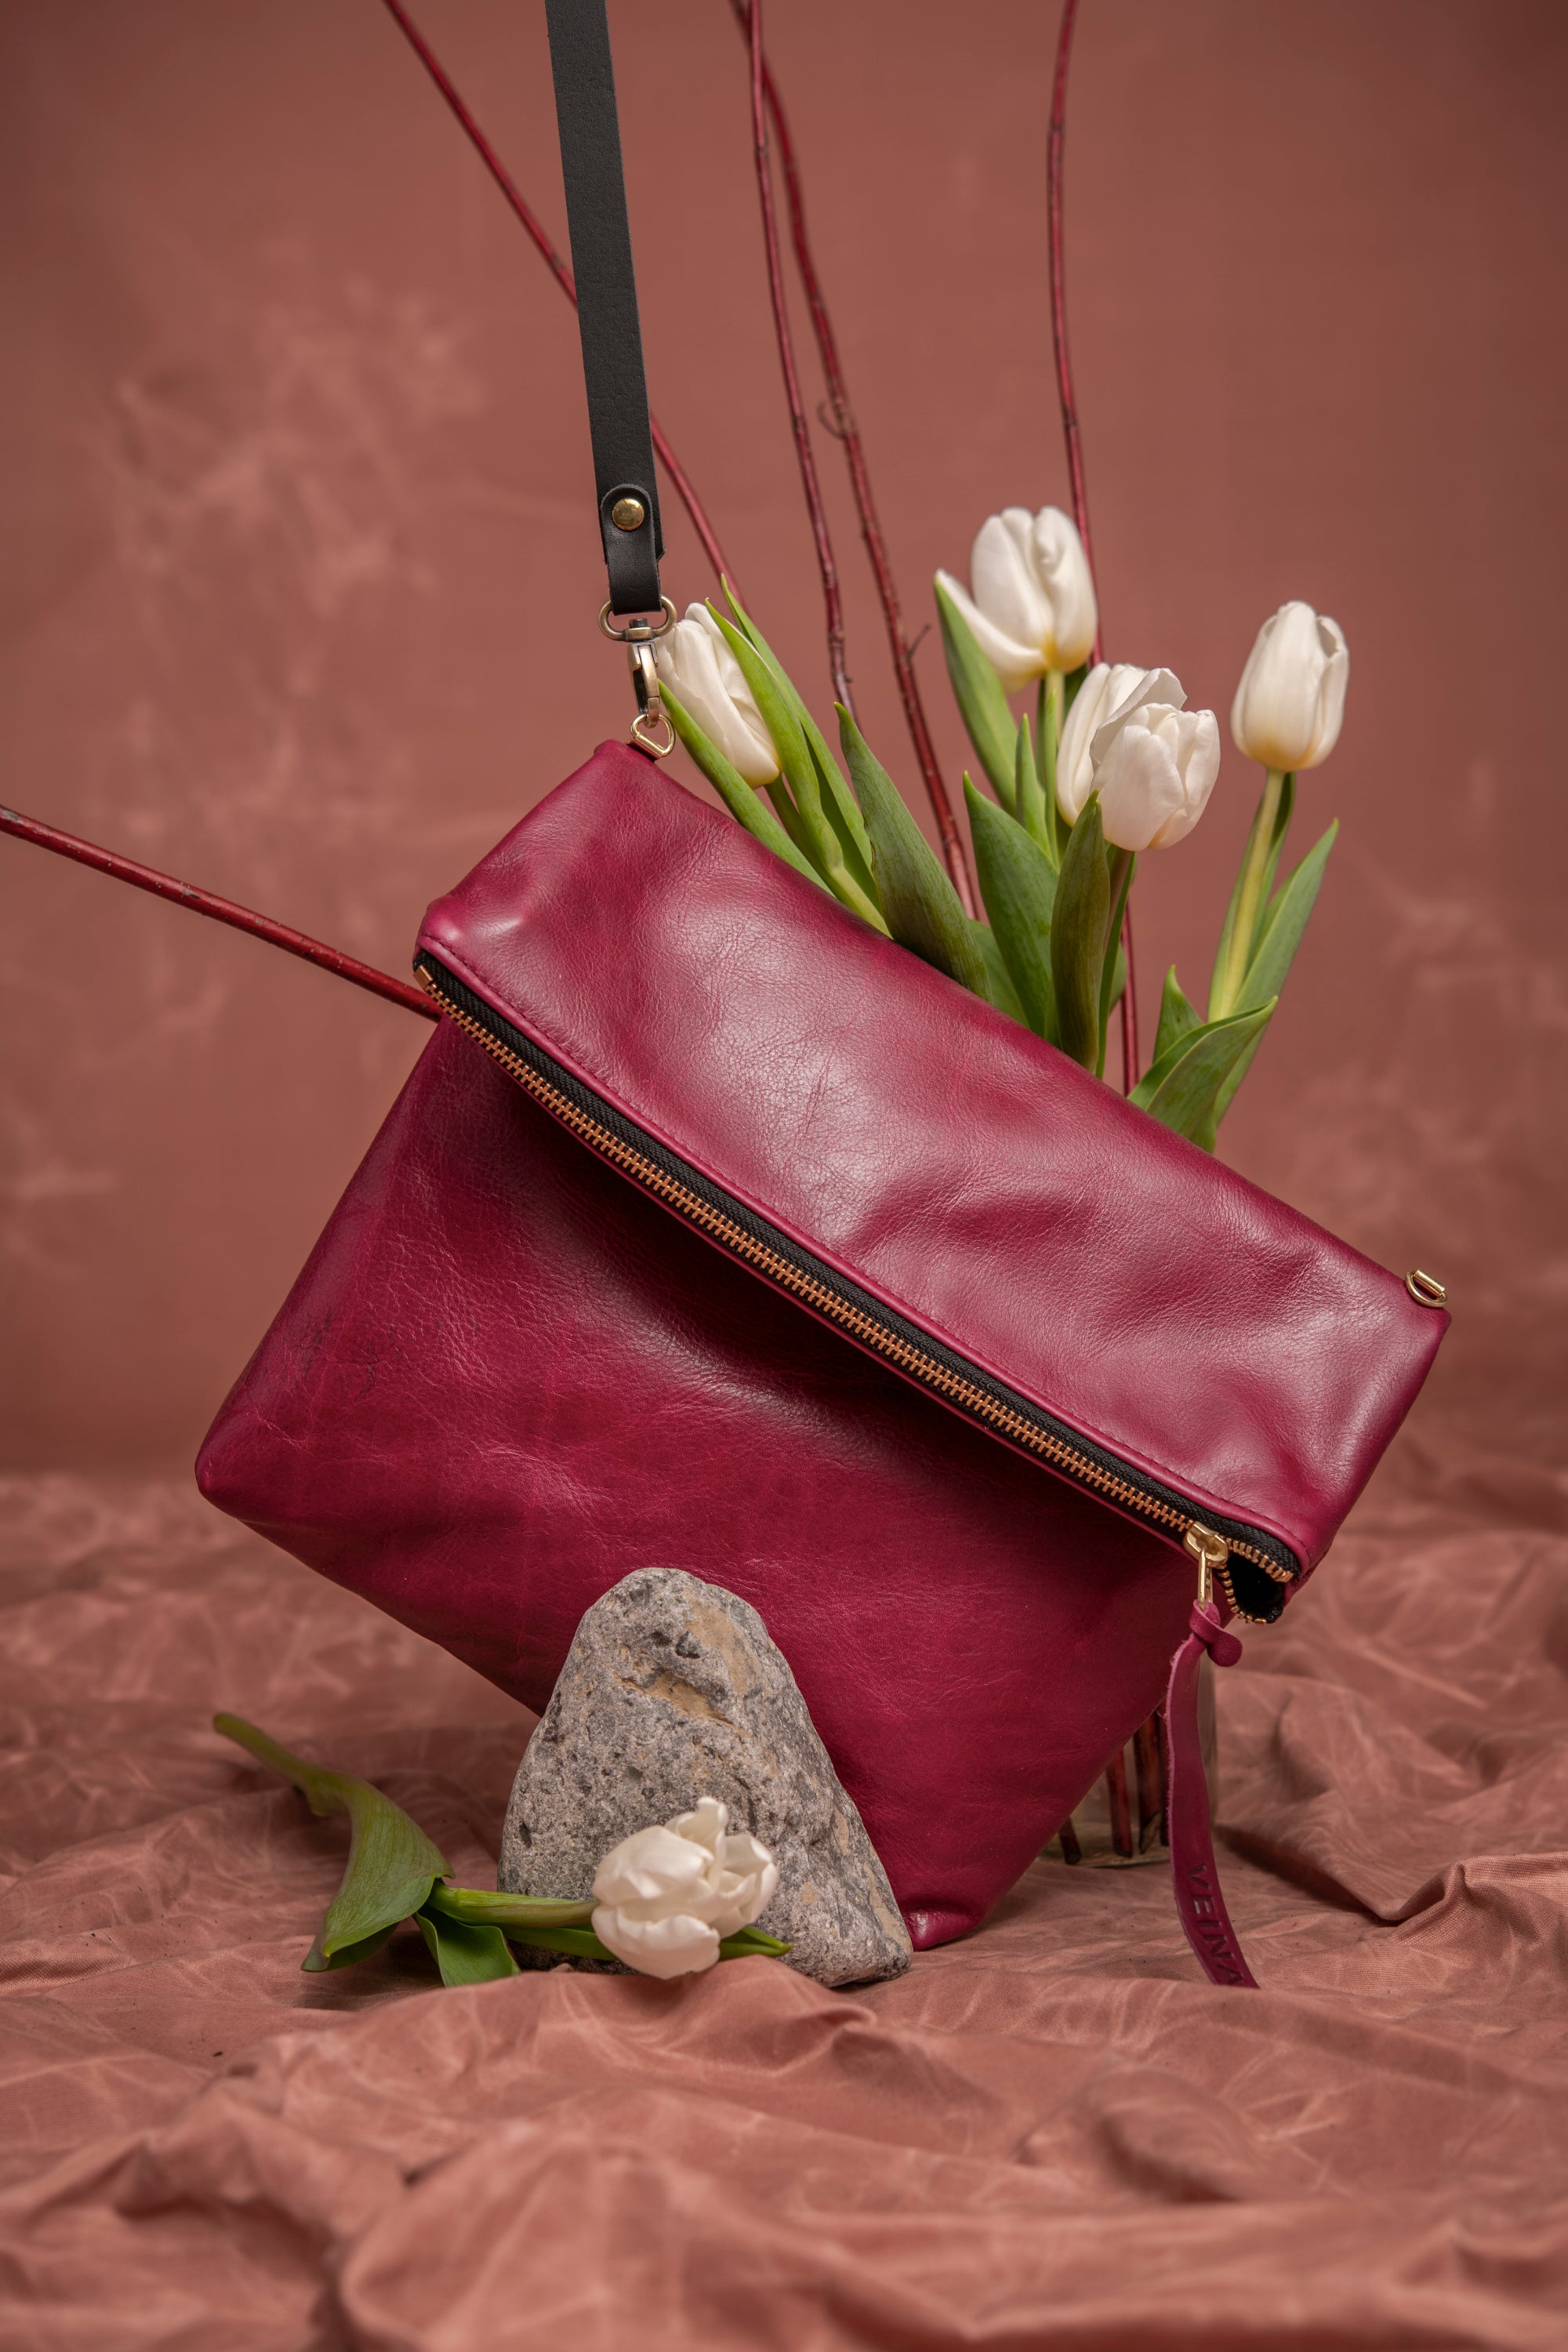 Leather clutch bag with crossbody strap BORDEAUX made to order by Veinage, handmade in Montreal Canada